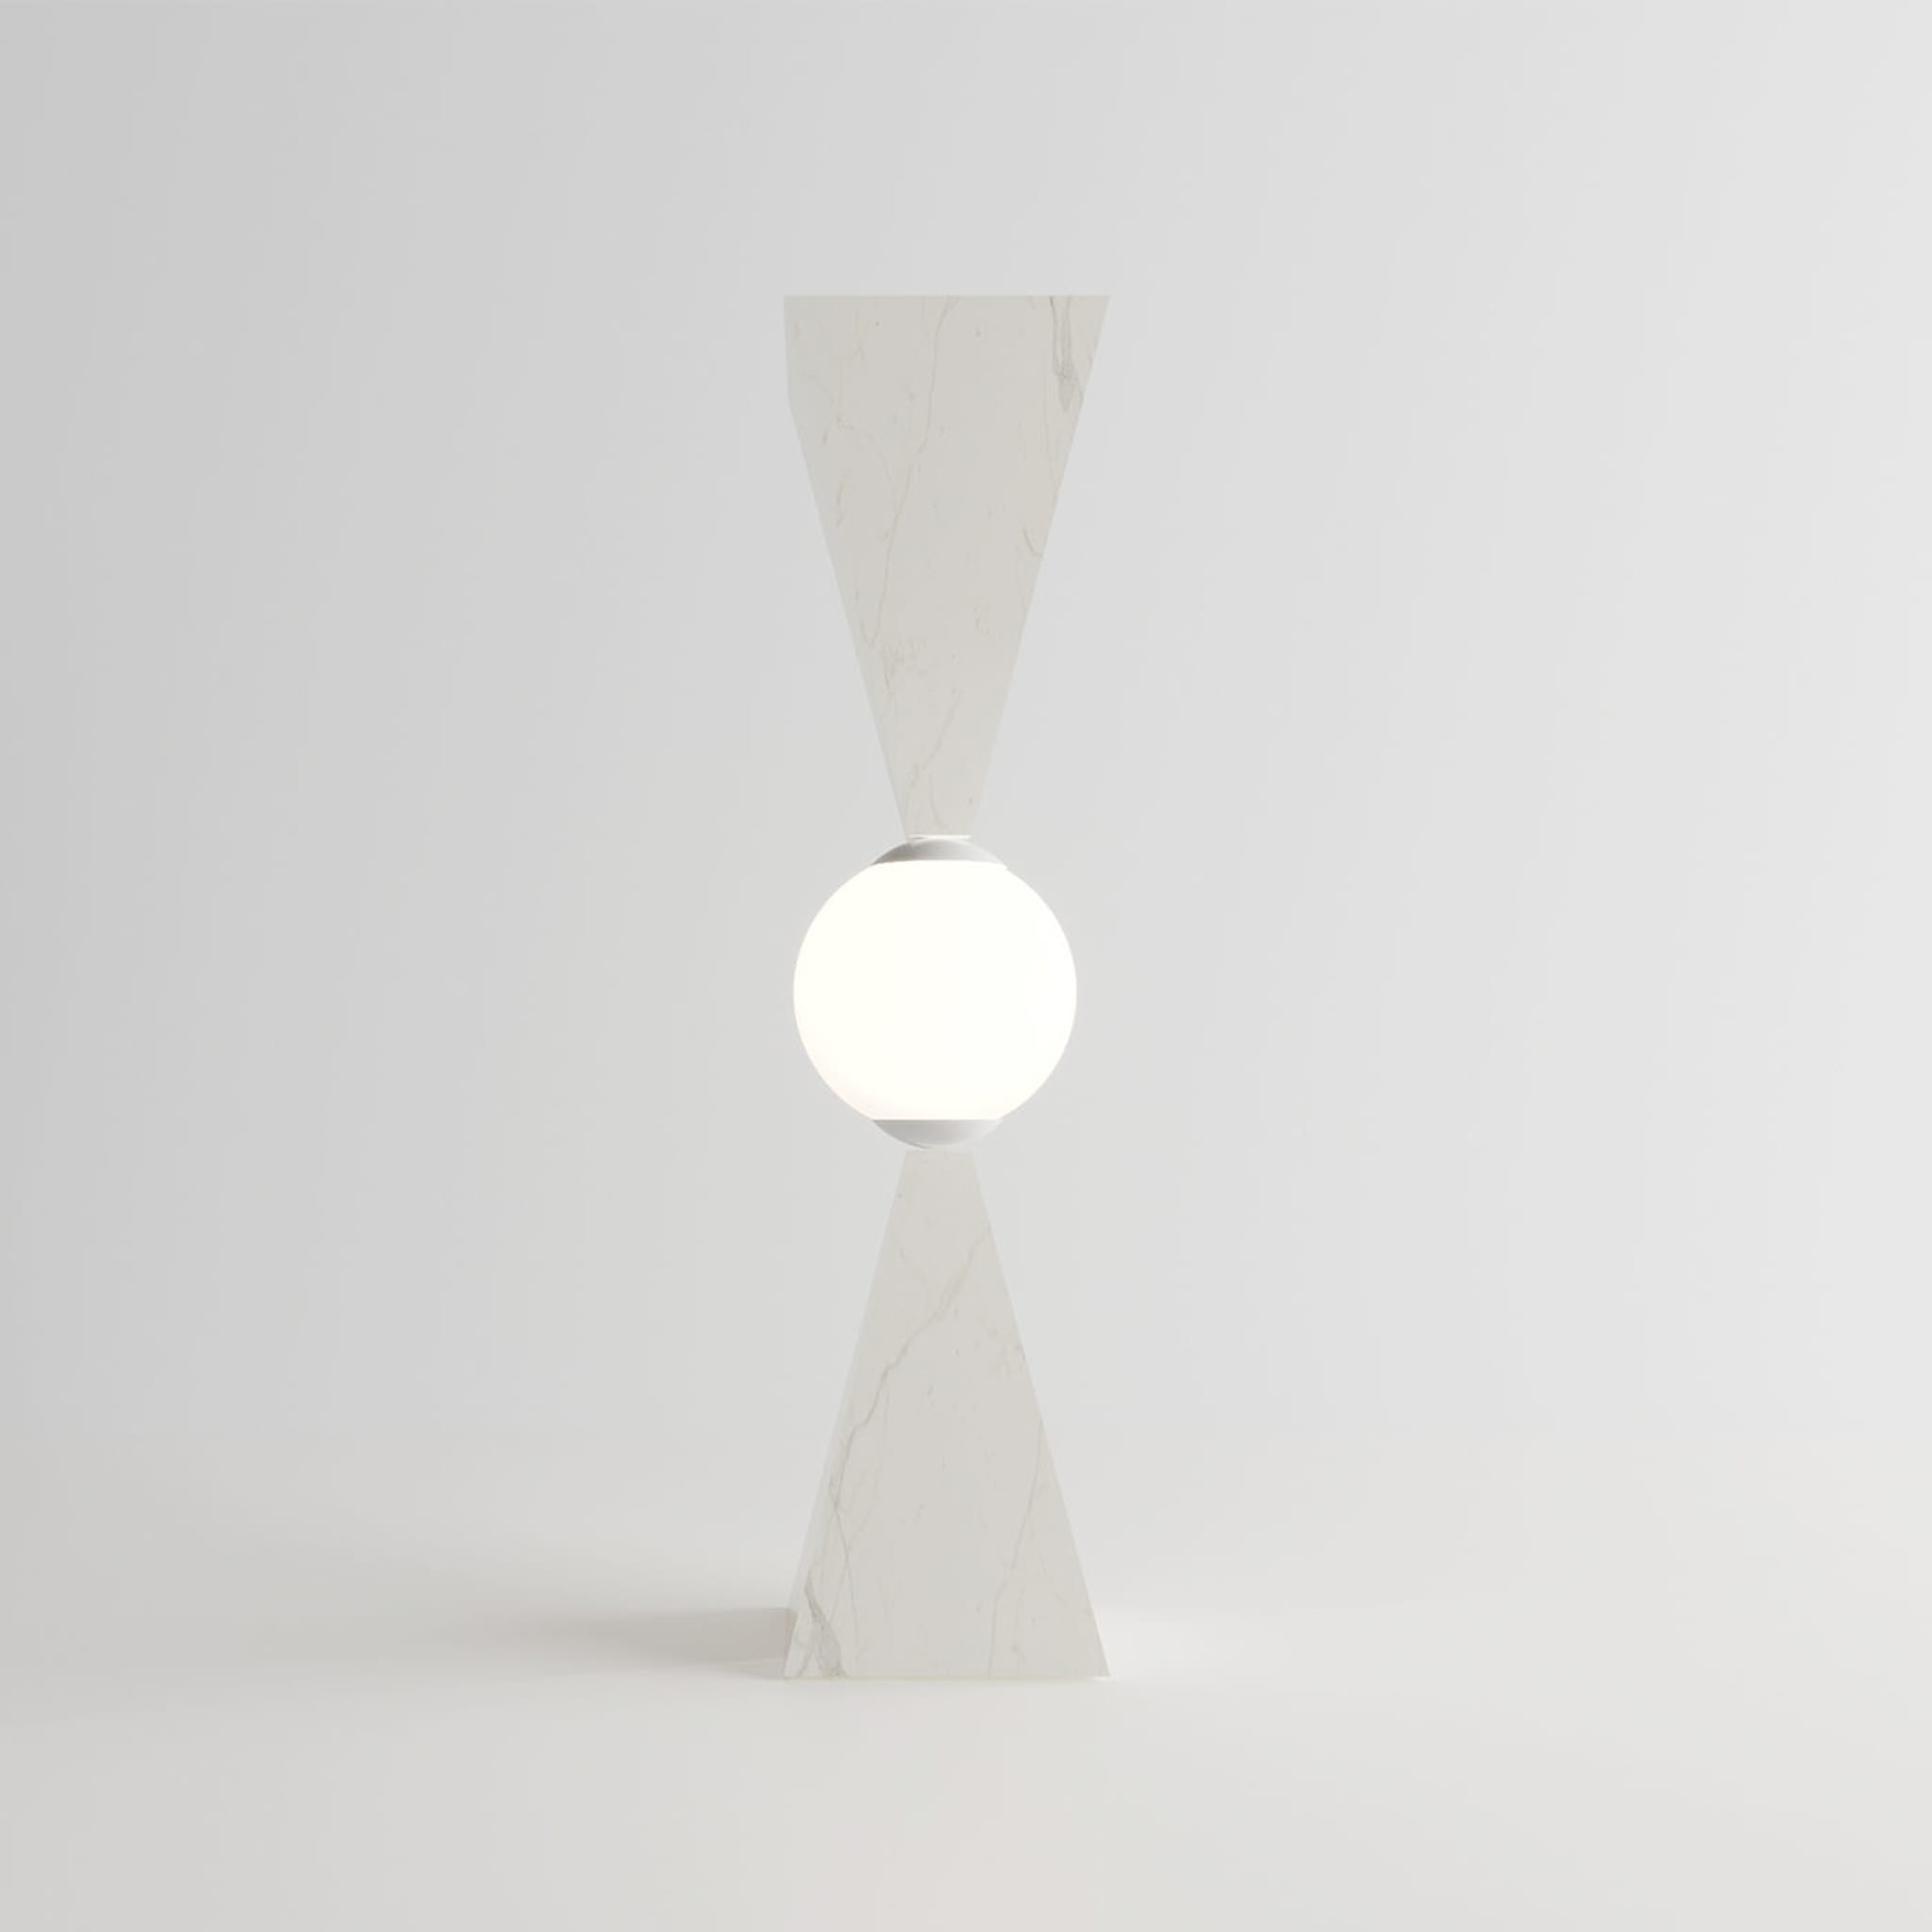 Clessidra Table Lamp in Gold Calacatta Marble by sid&sign - Alternative view 5